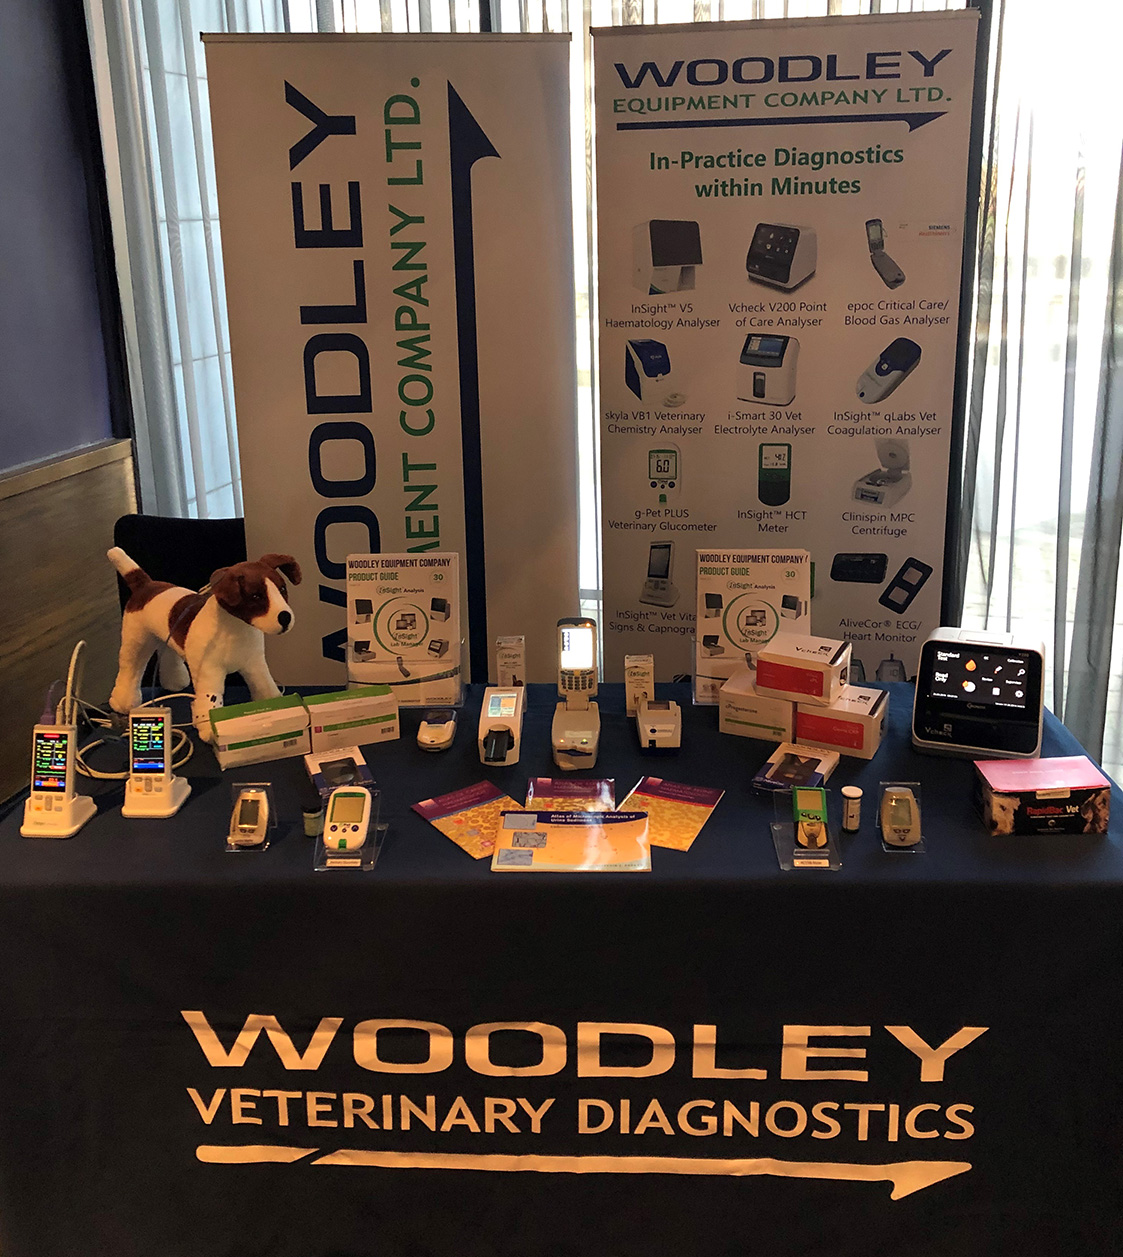 Woodley are Event Sponsor at Vets Now CPD ECC Bitesize Roadshow in Liverpool